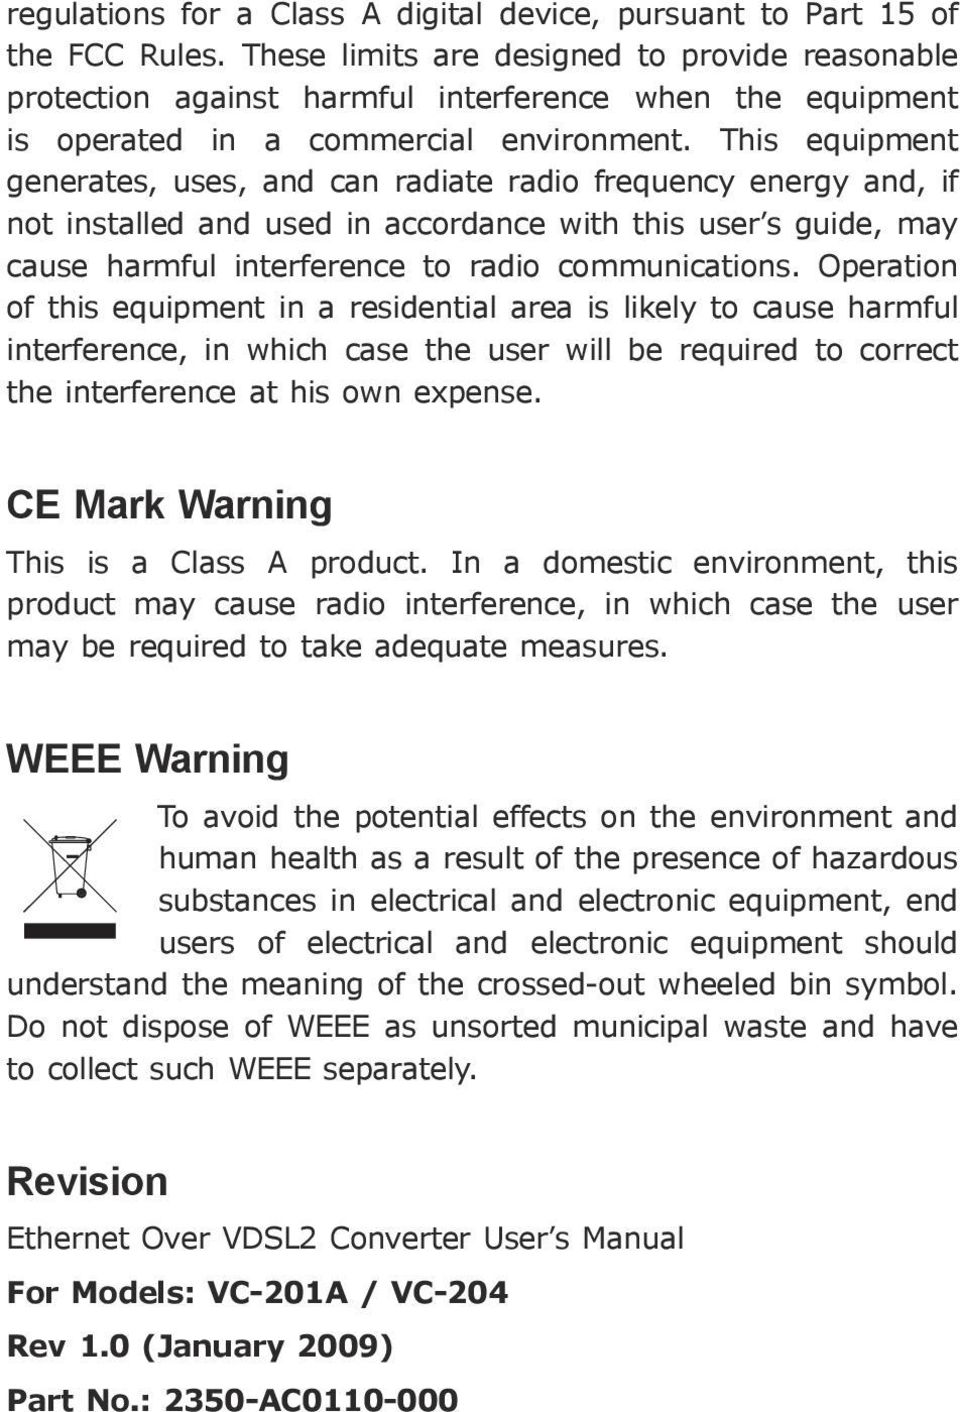 This equipment generates, uses, and can radiate radio frequency energy and, if not installed and used in accordance with this user s guide, may cause harmful interference to radio communications.